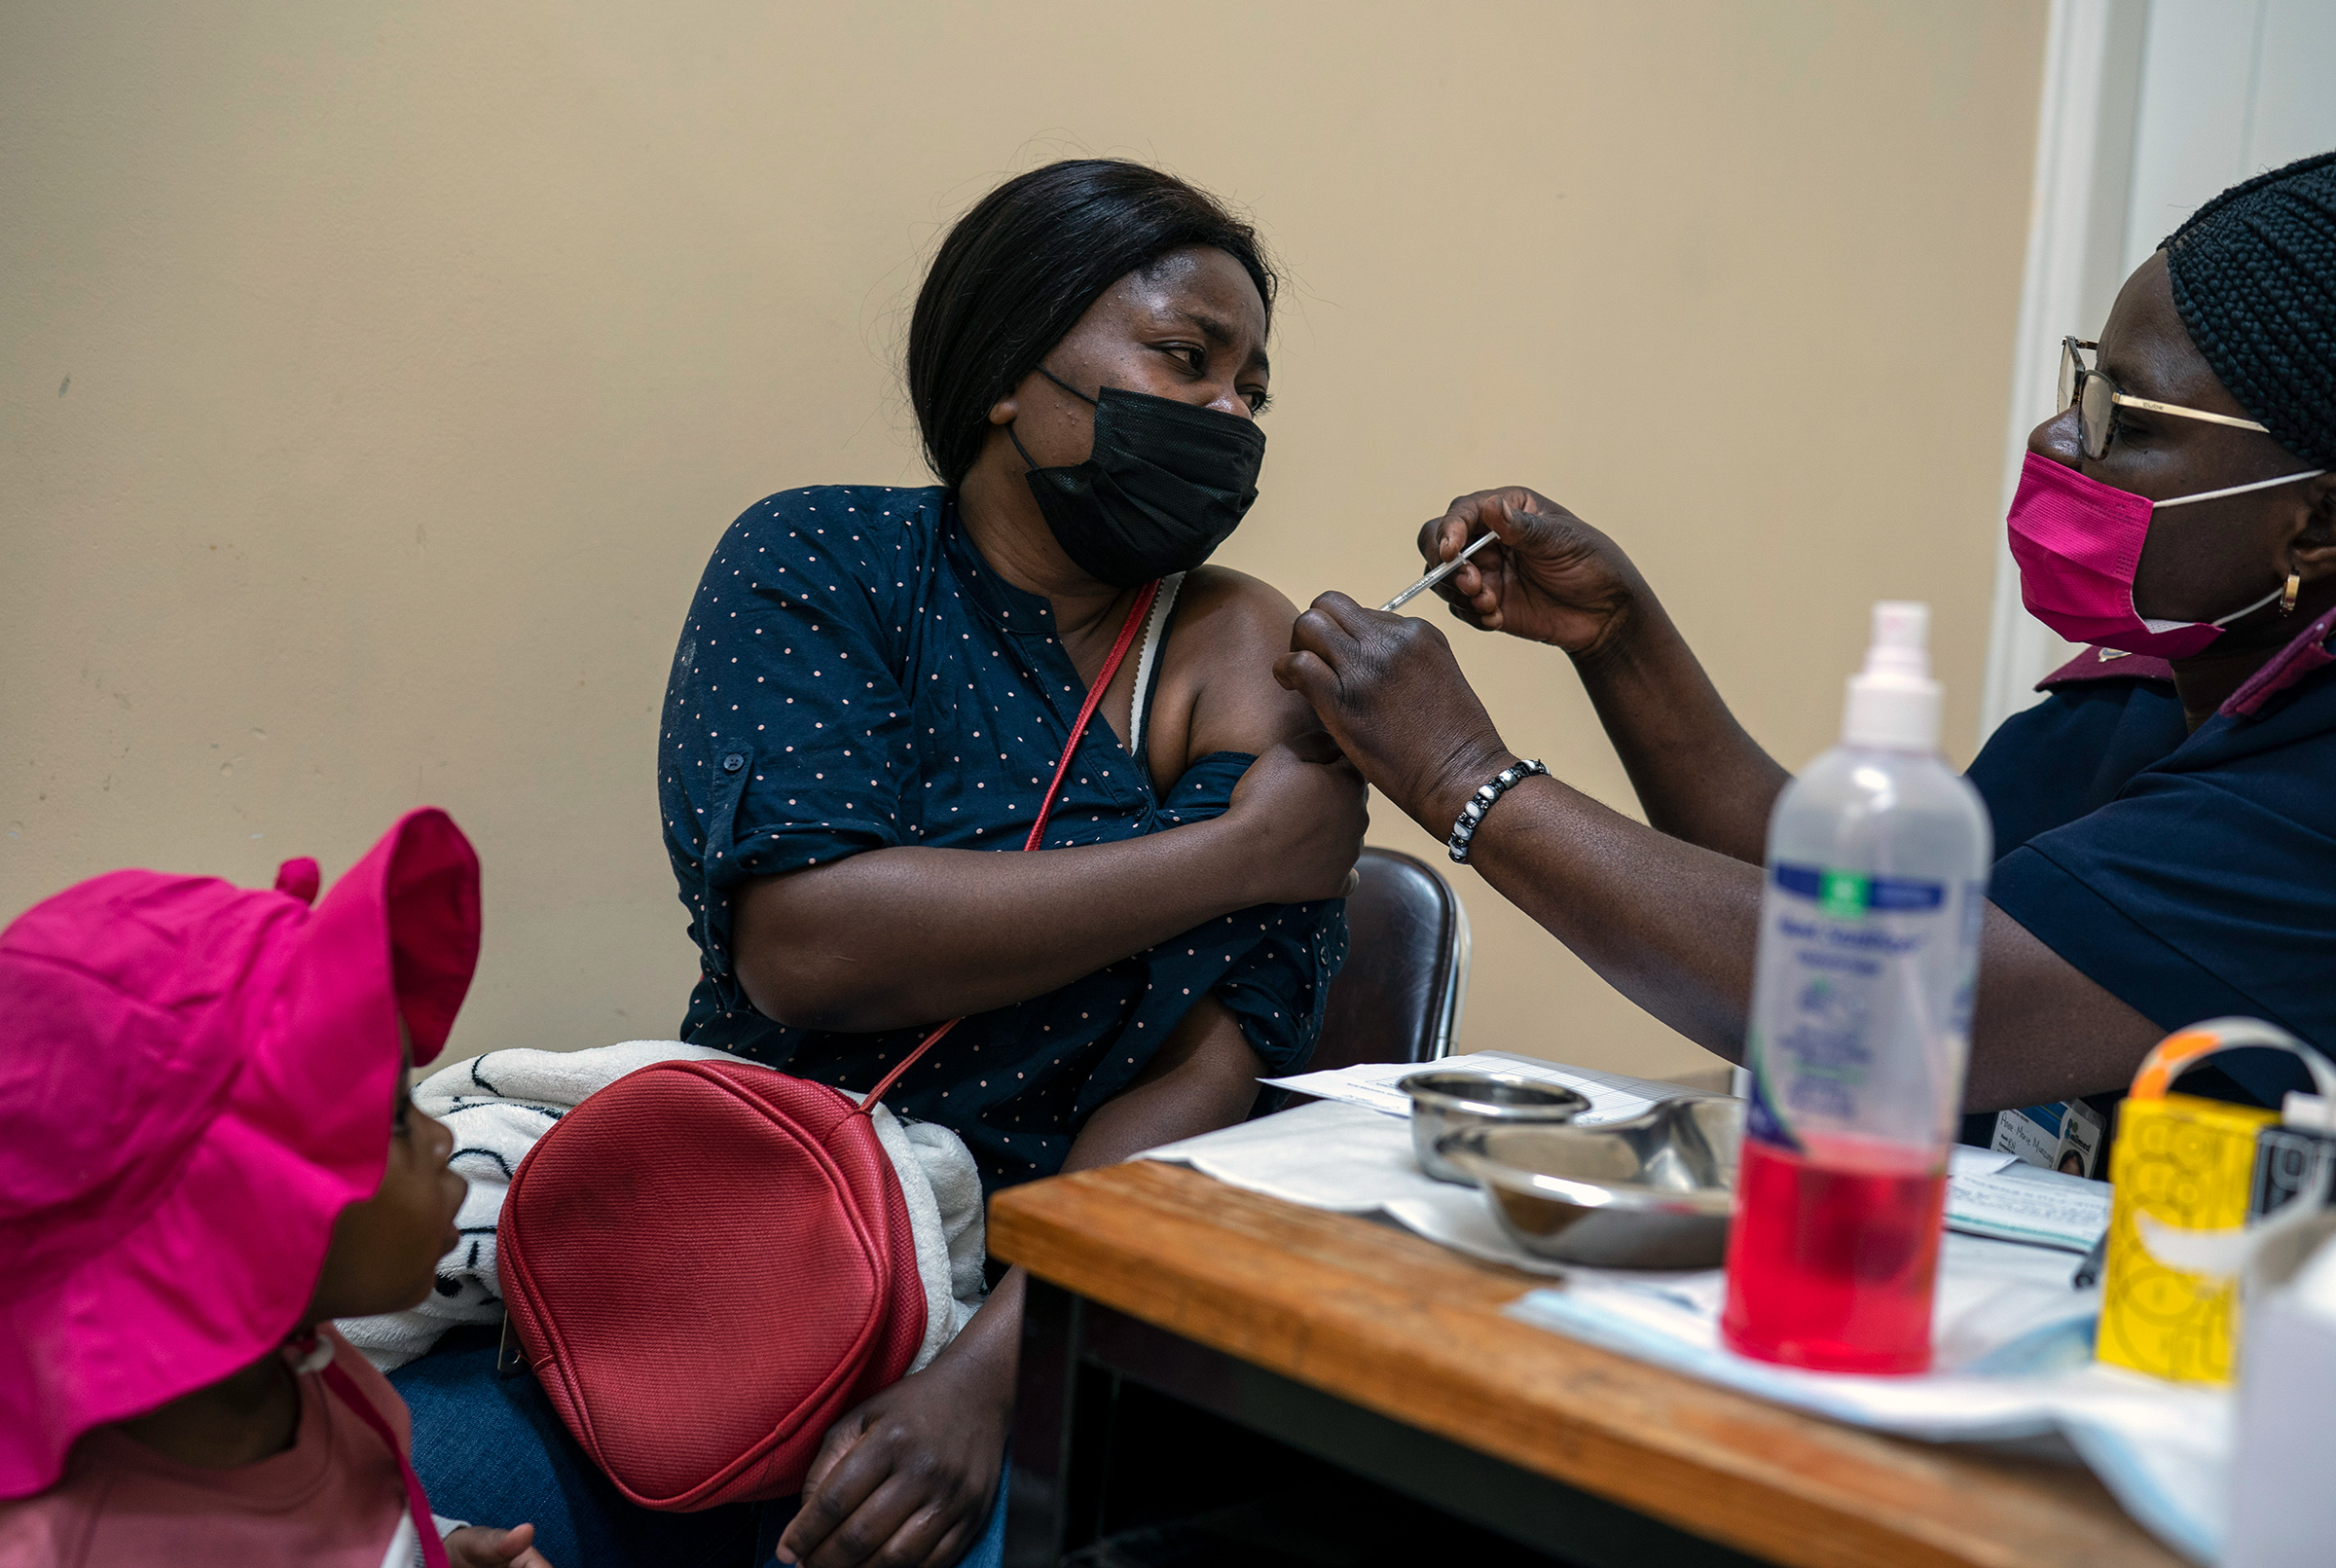 A woman receives a dose of COVID-19 vaccine in Johannesburg, South Africa, on Tuesday, Nov. 30, 2021. Vaccines are finally available in many African countries, but some people there are wary of taking them. (Joao Silva—The New York Times/Redux)